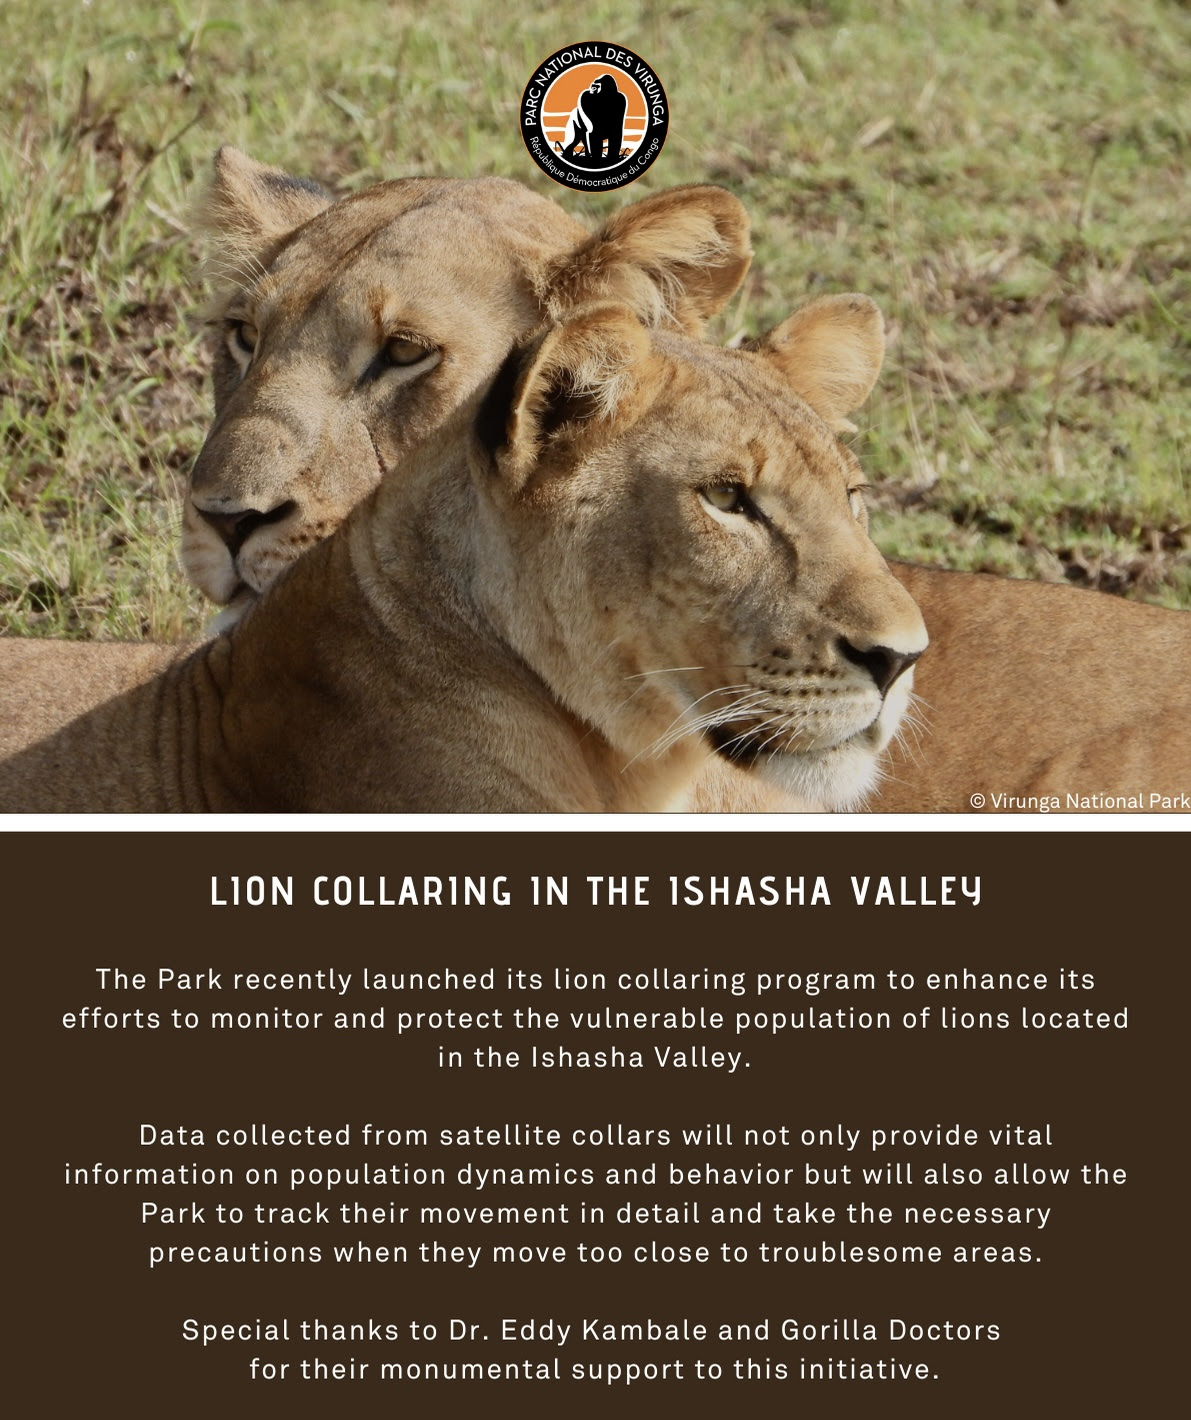 The Park recently launched its lion collaring program to enhance it’s efforts to monitor and protect the vulnerable population of lions located in the Ishasha Valley.?